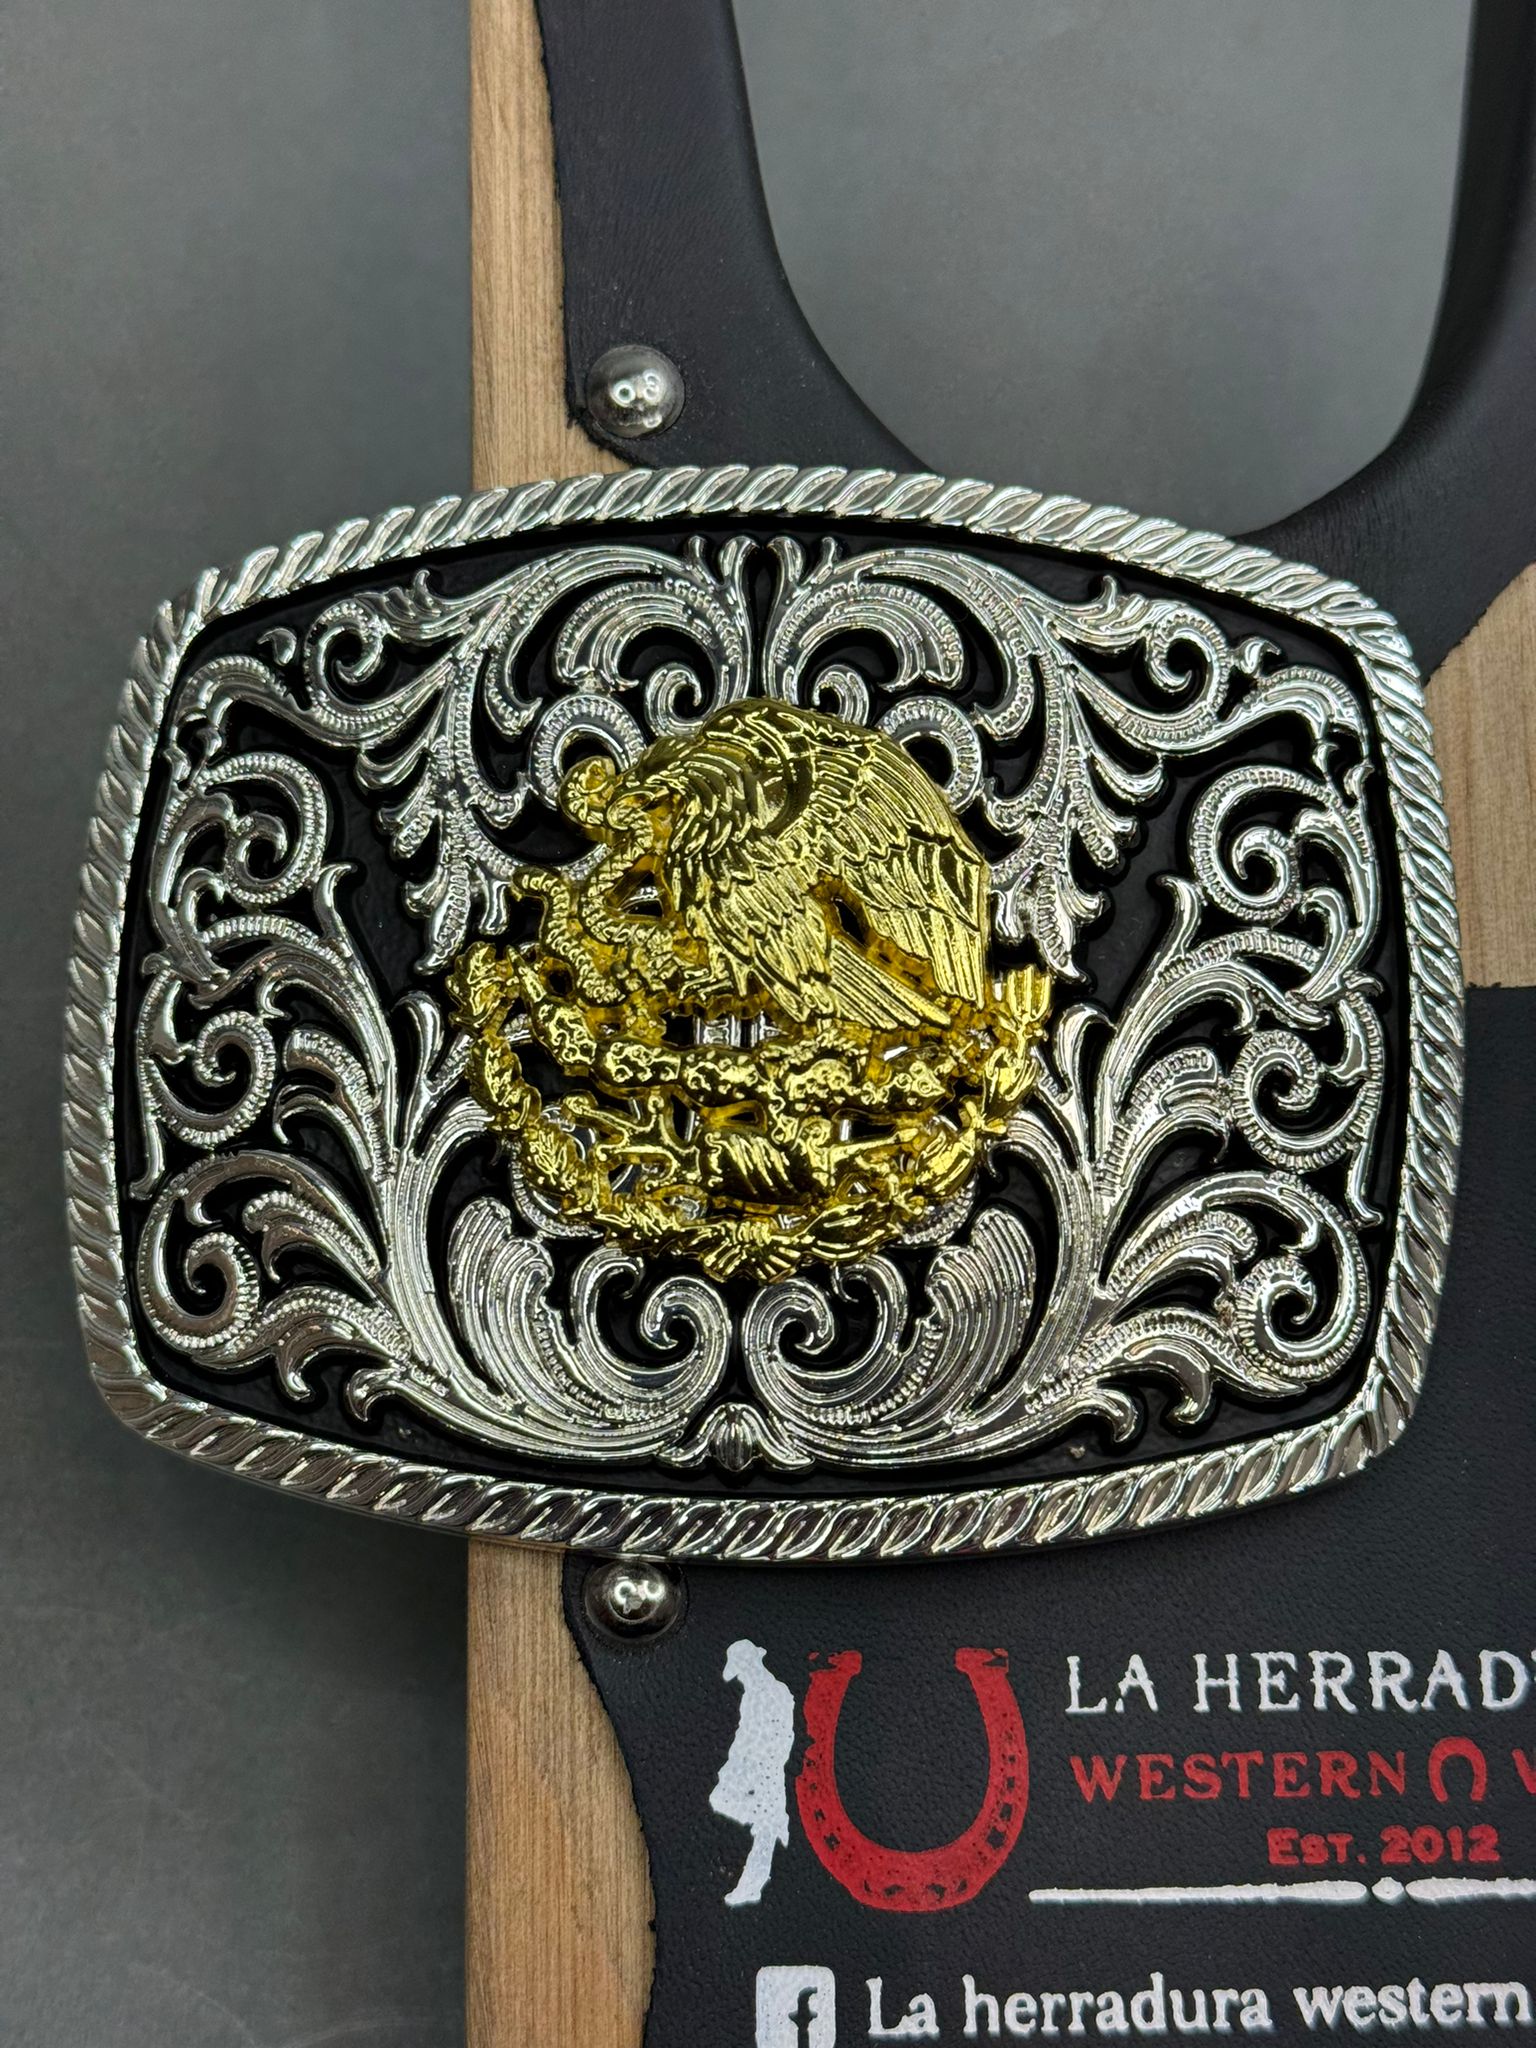 ROUNDED SQUARE SILVER BLACK GOLD MEXICO COAT OF ARMS BUCKLE